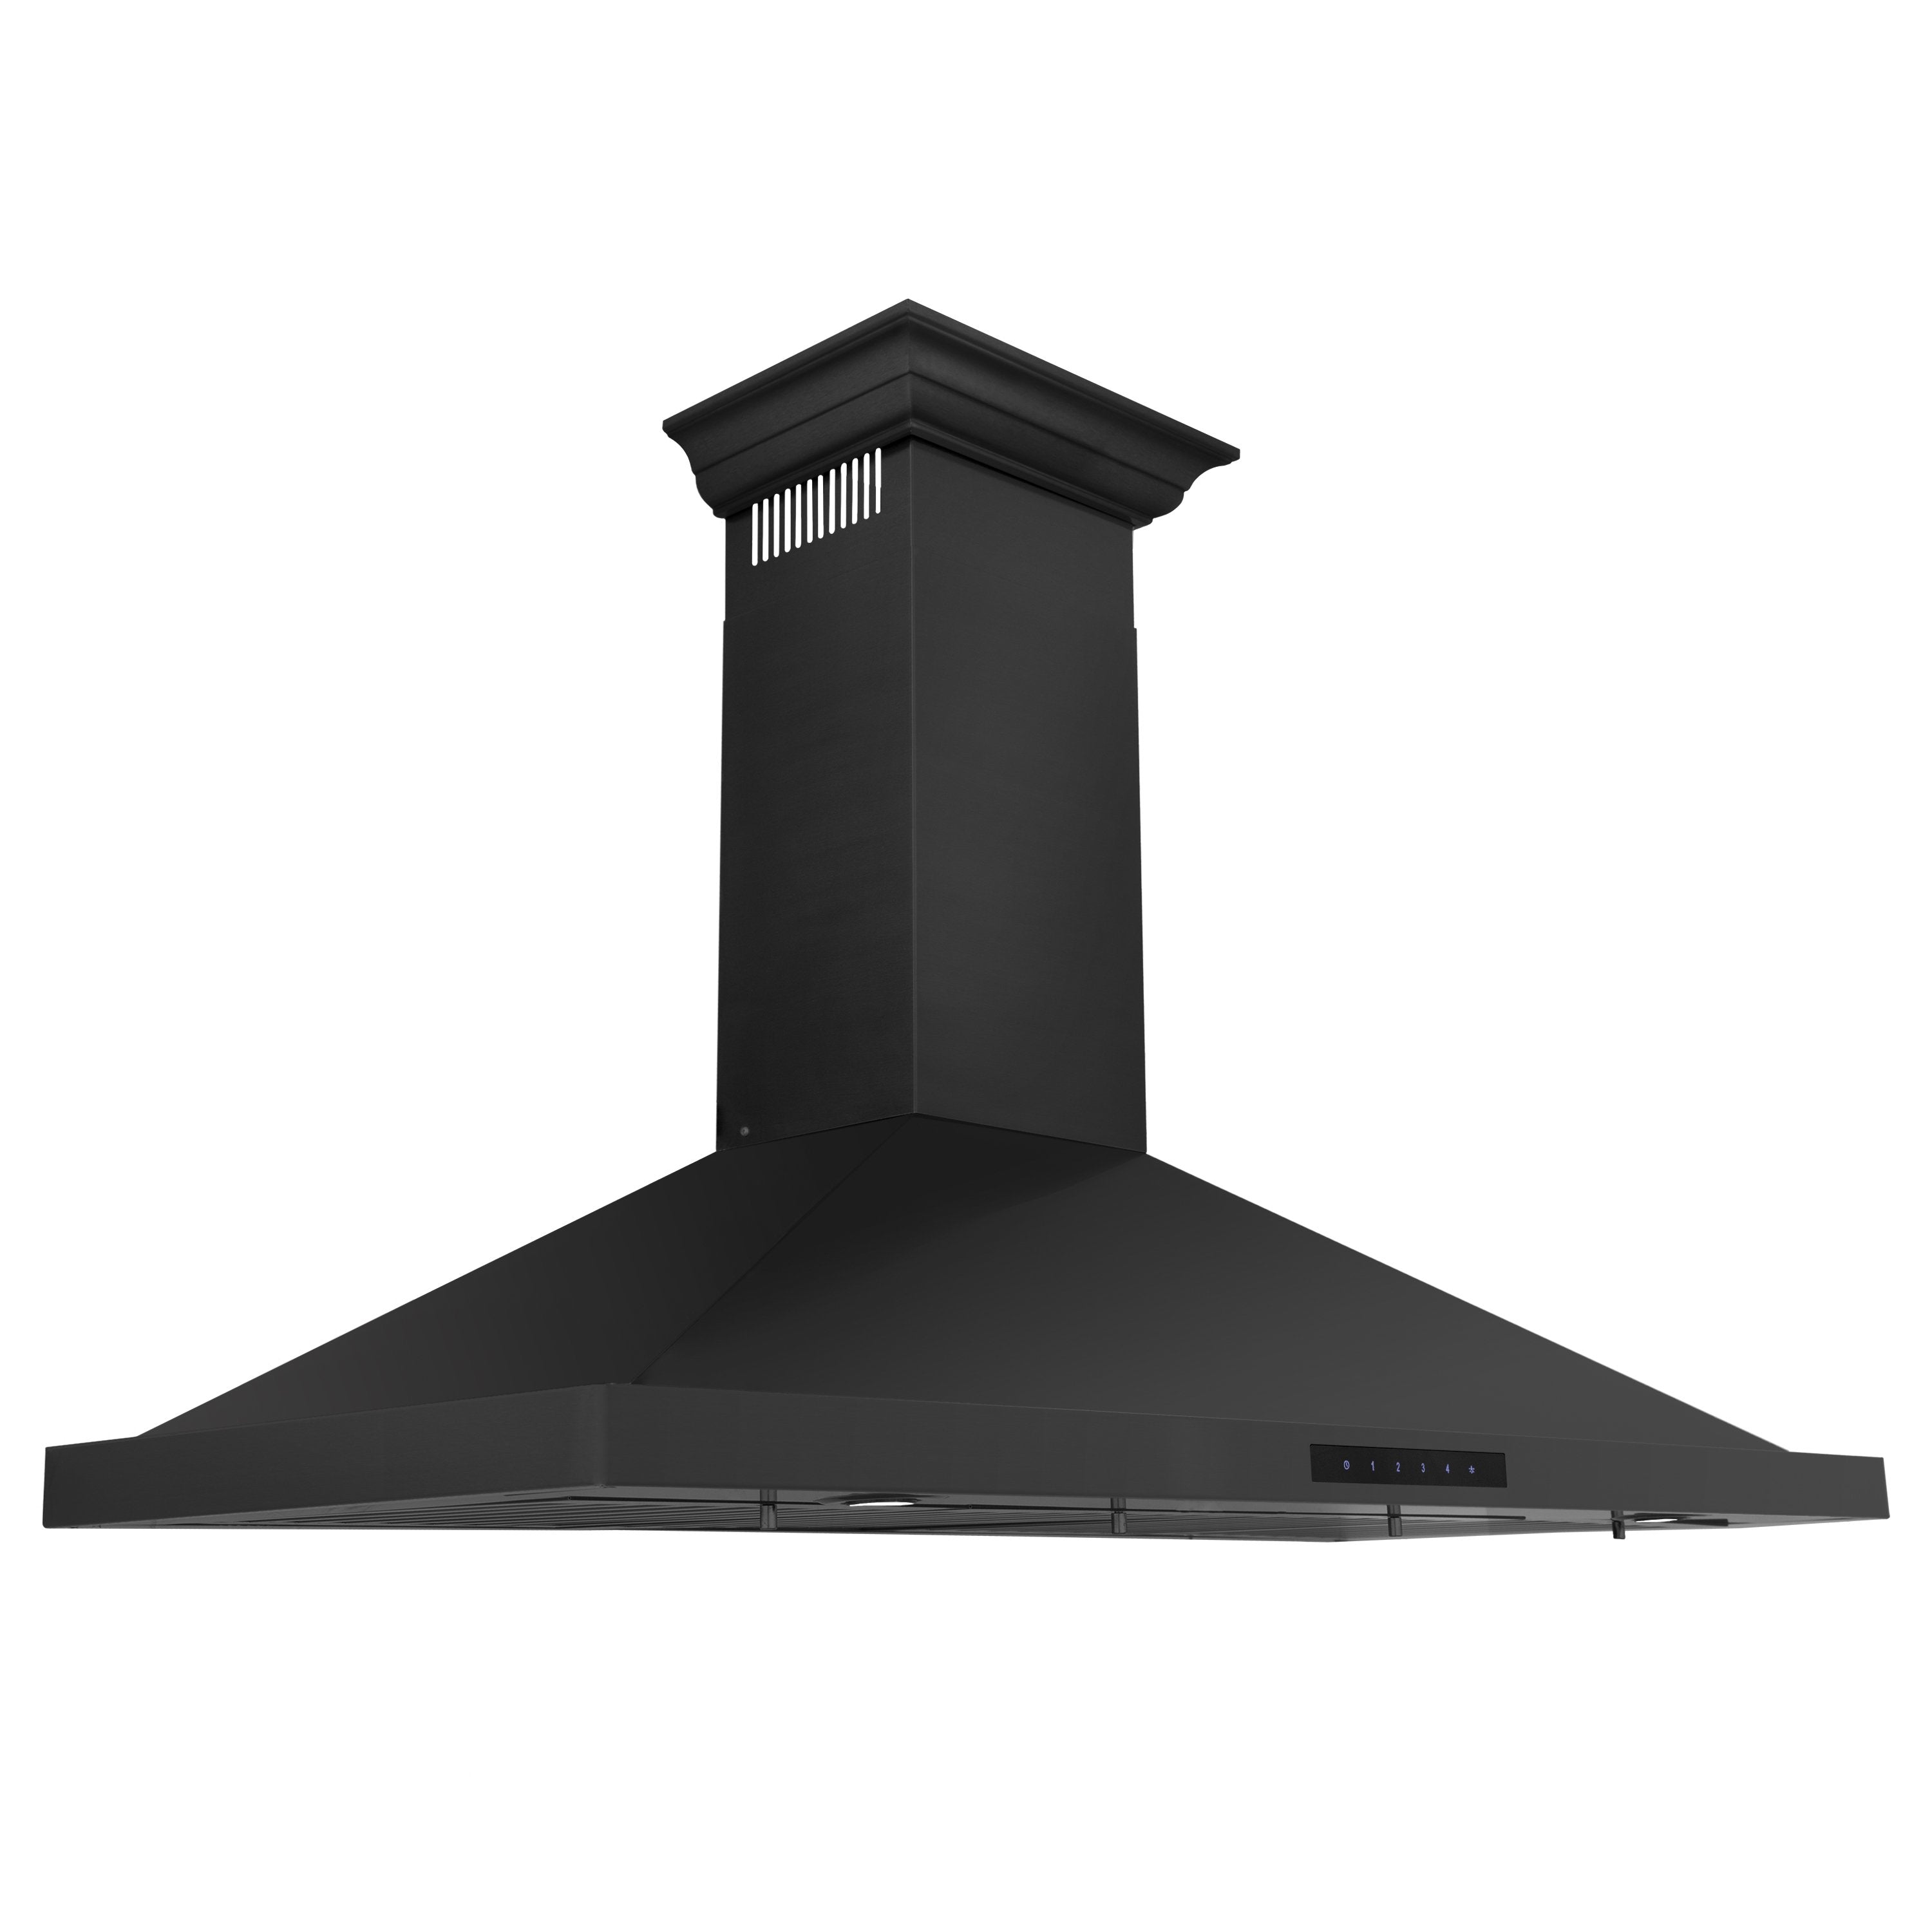 ZLINE 48" Convertible Vent Wall Mount Range Hood in Black Stainless Steel with Crown Molding (BSKBNCRN-48)